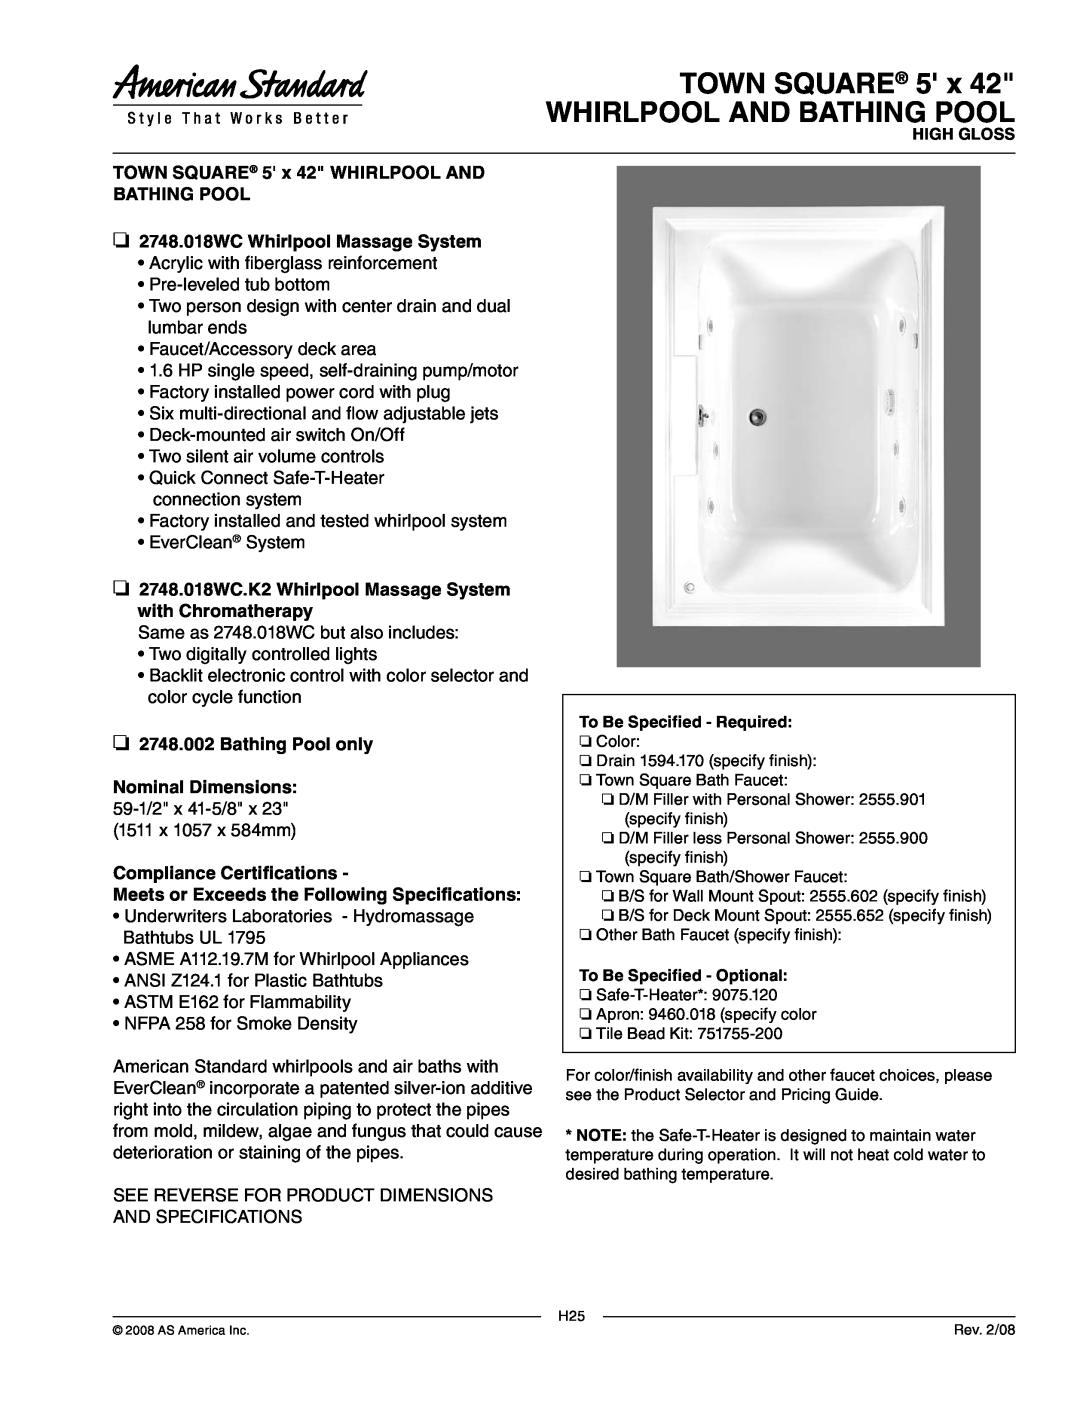 American Standard 2748.002 dimensions TOWN SQUARE 5 x WHIRLPOOL AND BATHING POOL, 2748.018WC Whirlpool Massage System 